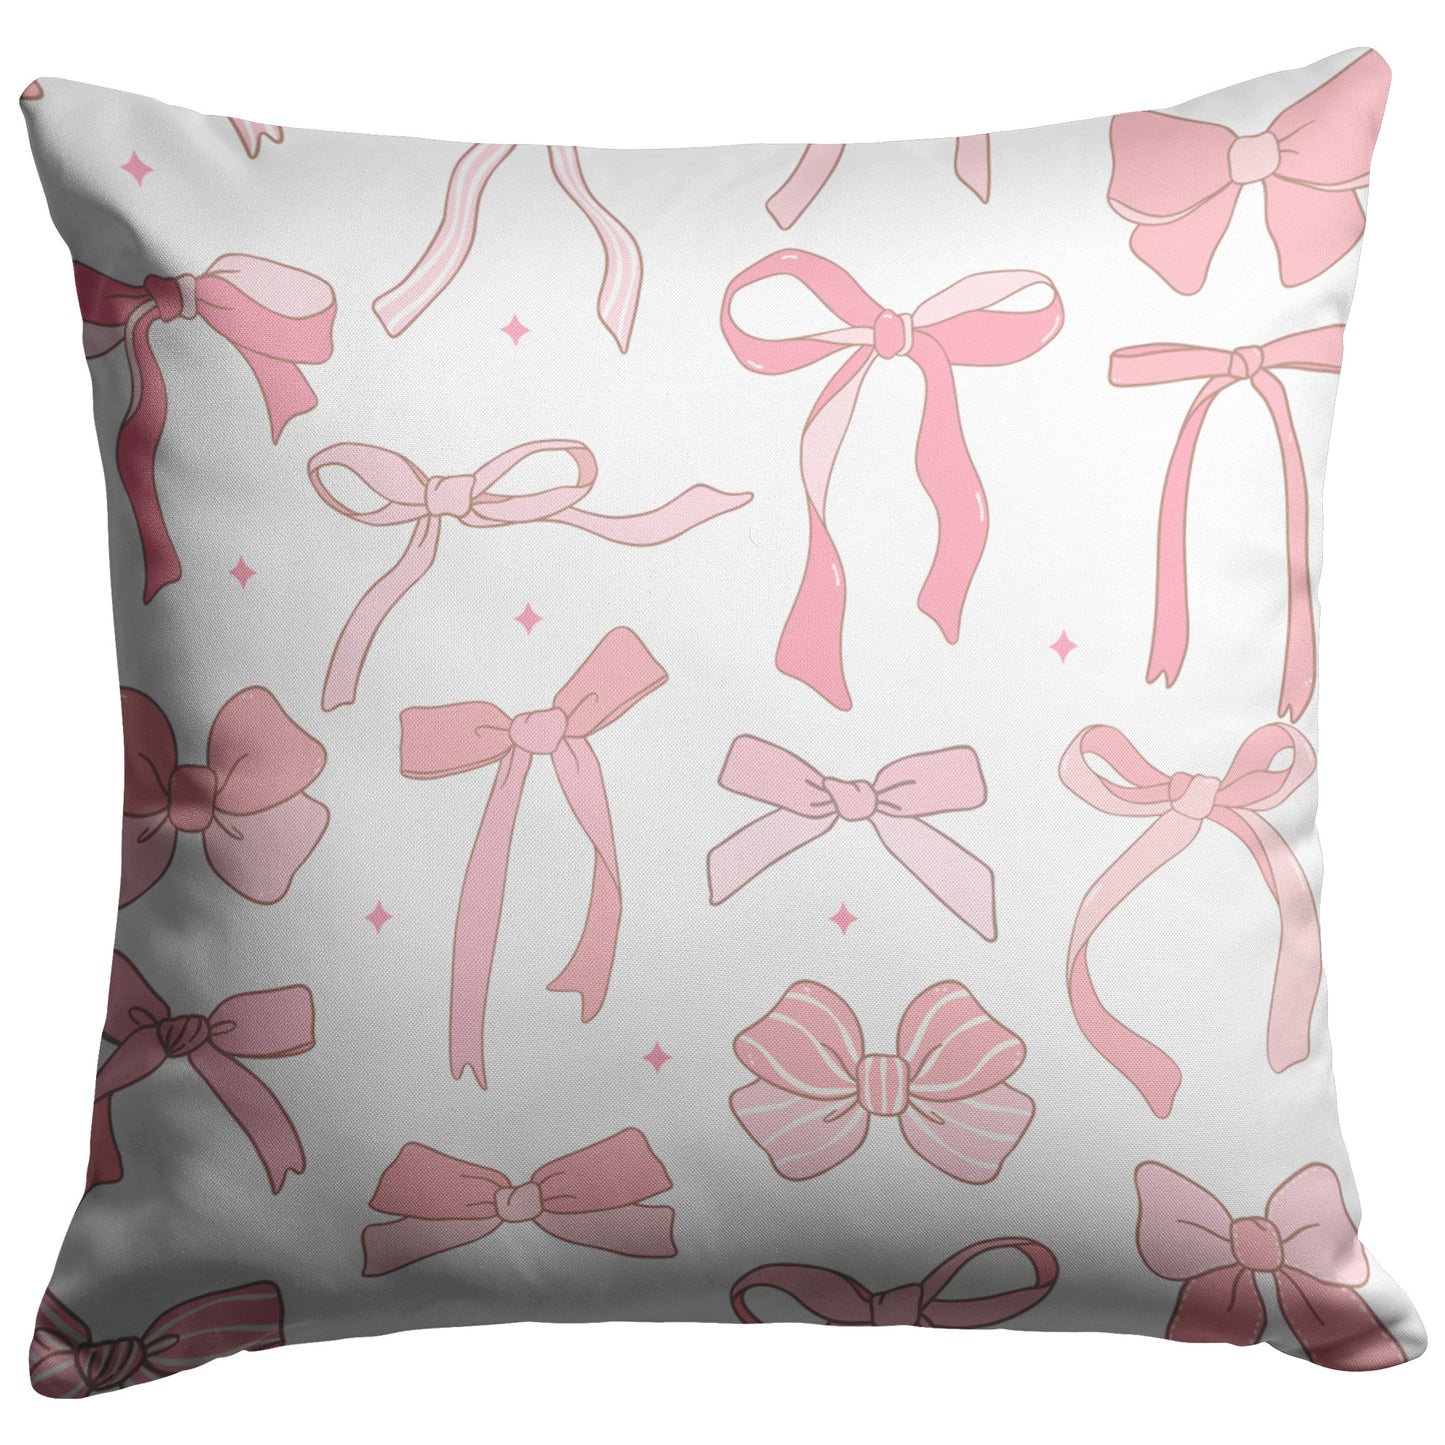 Coquette Large Pink Heart & Bow Pattern Pillow Cover 26" Square